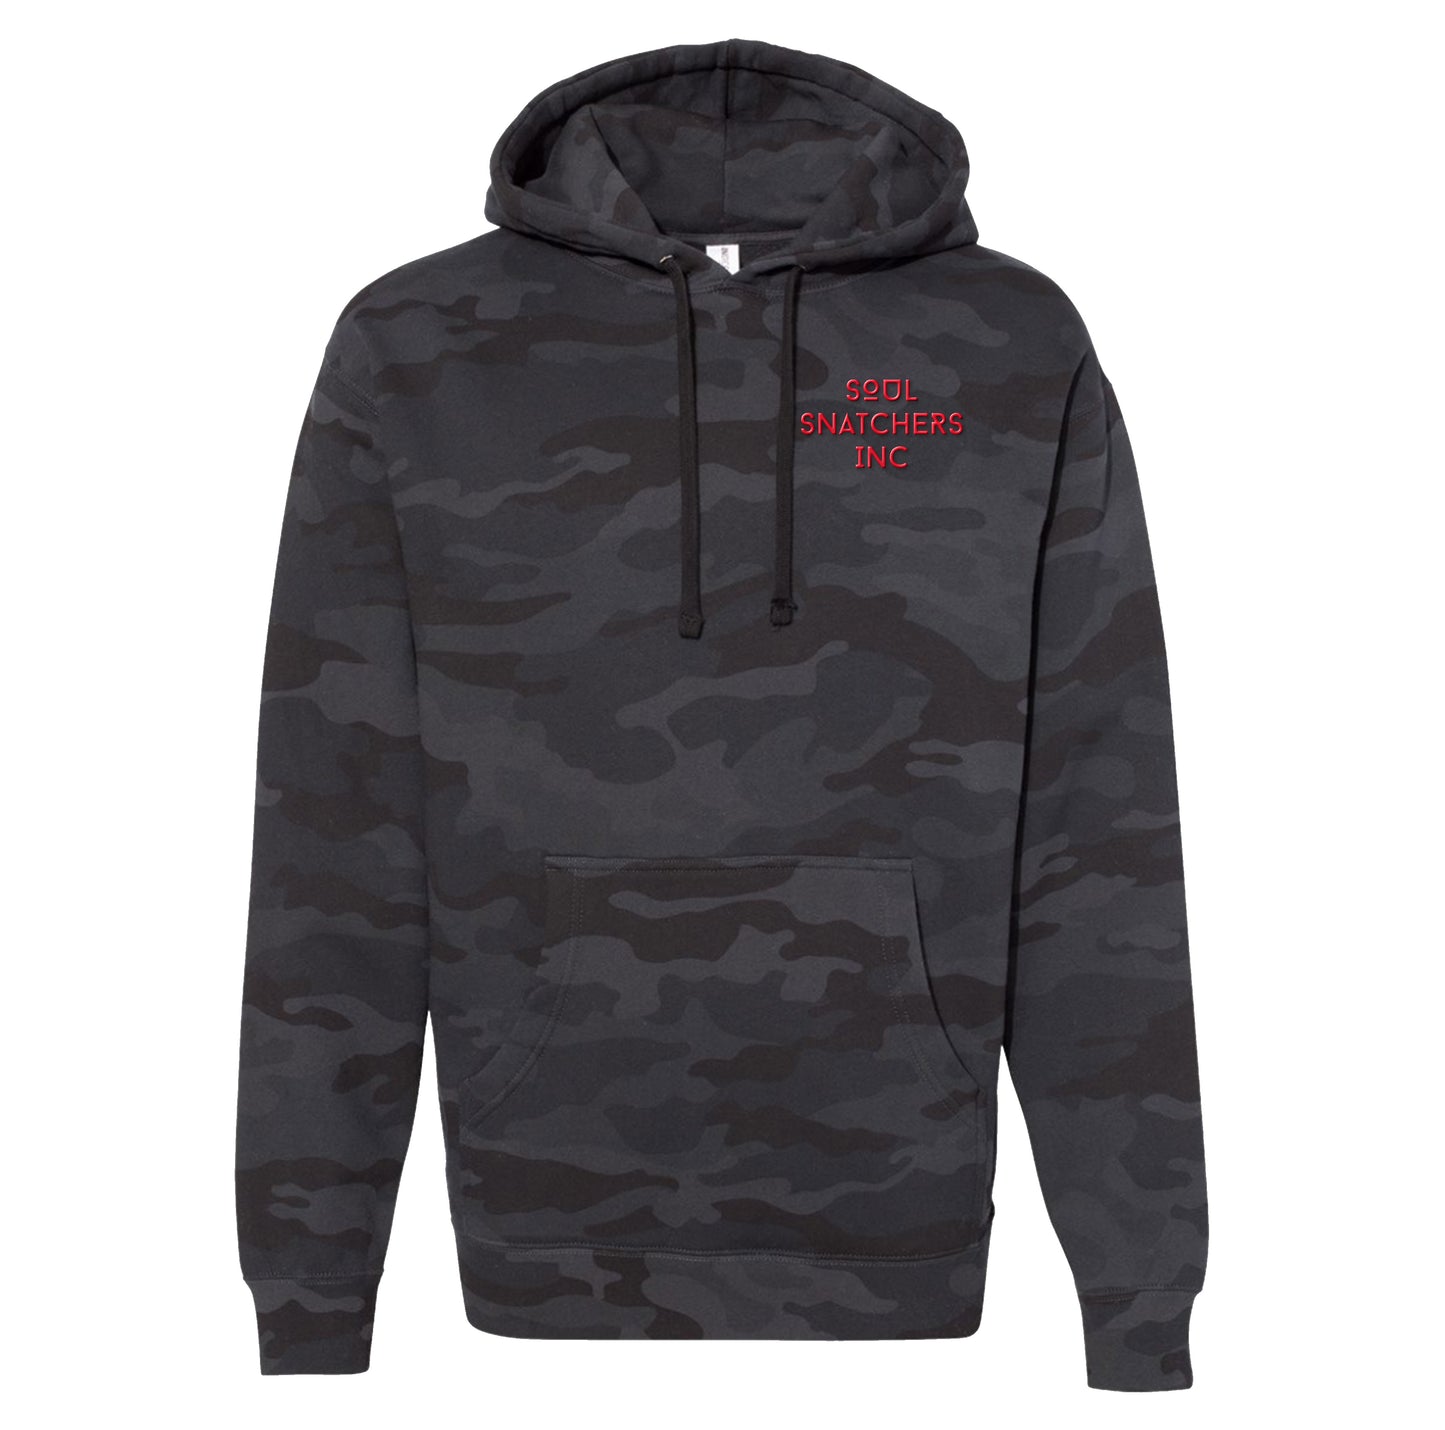 SSI Embroidered Hoodie